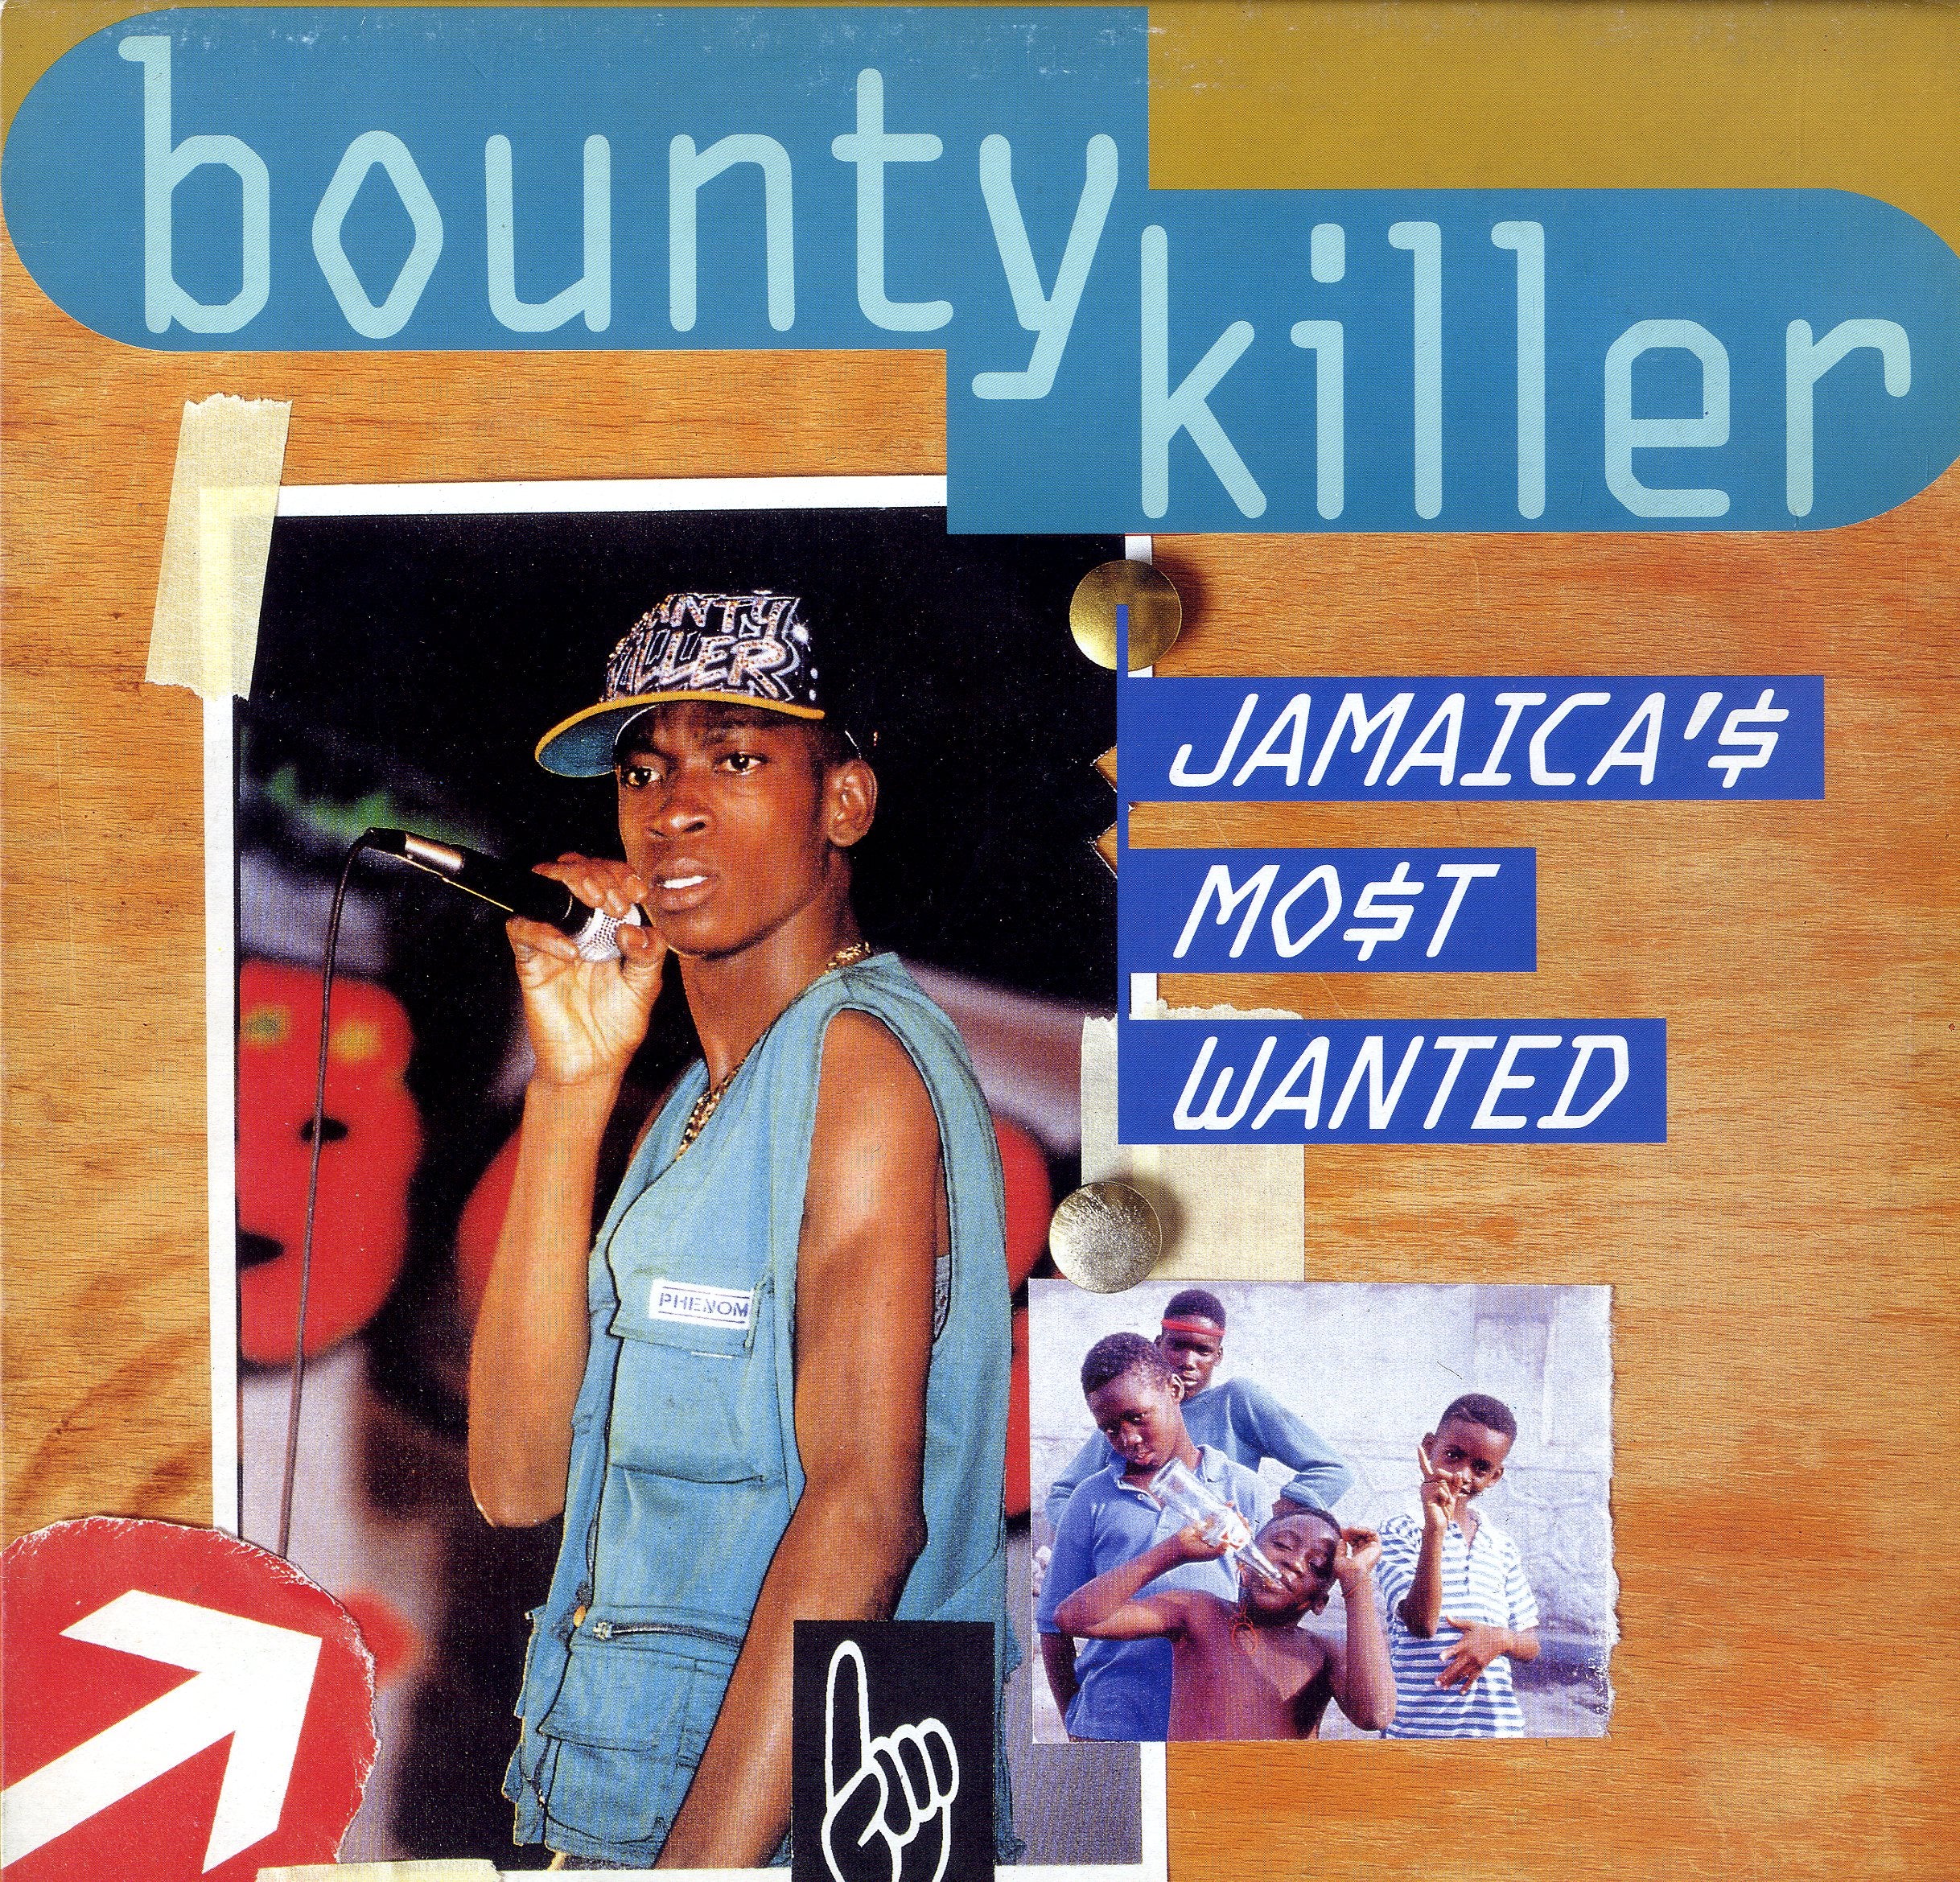 BOUNTY KILLER [Jamaica's Most Wanted]